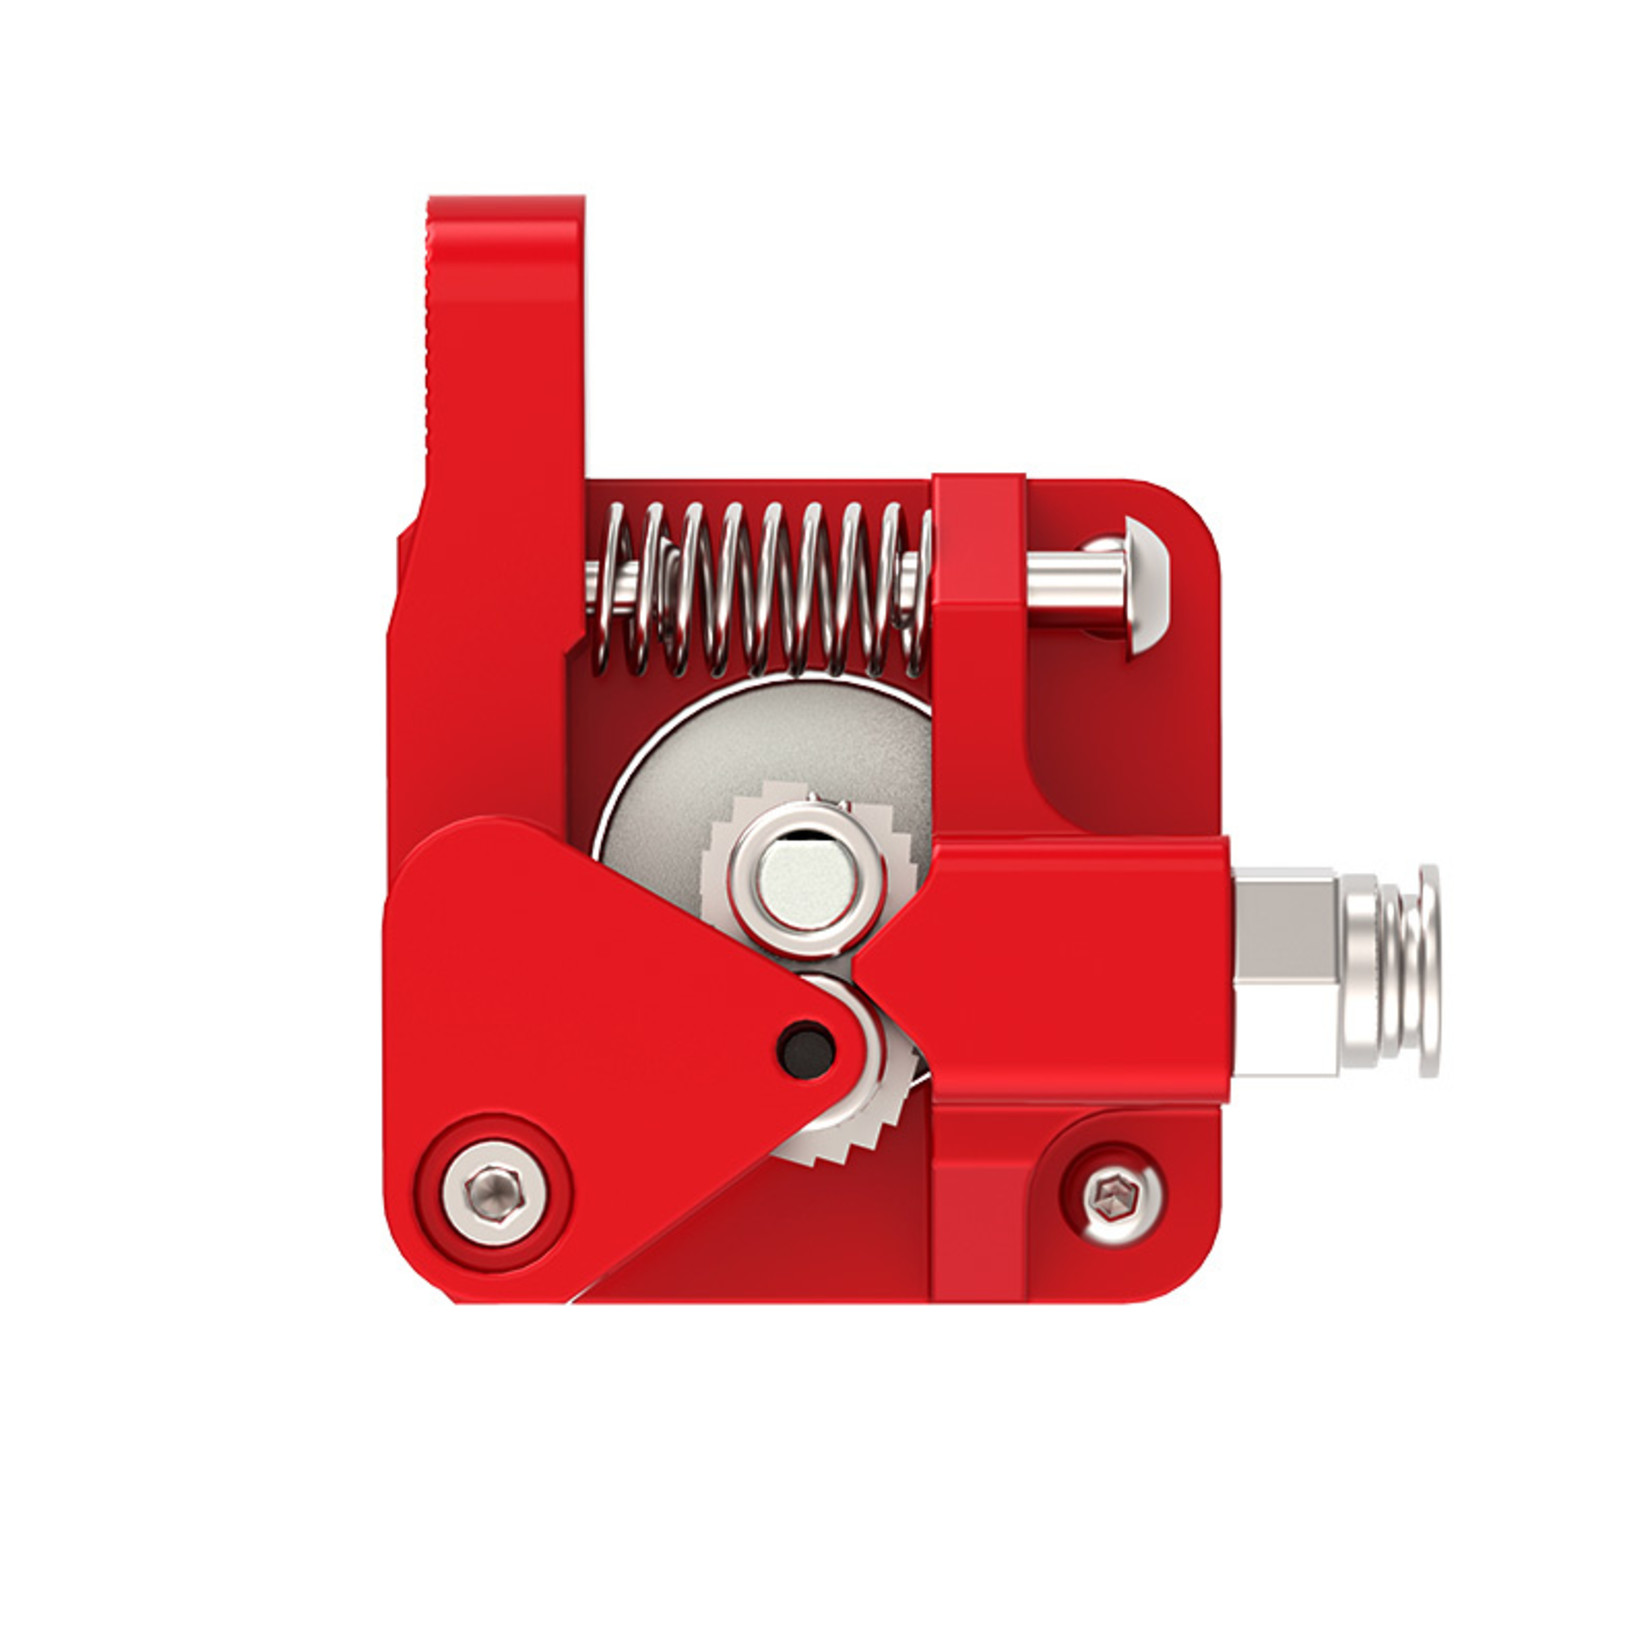 Creality/Ender CREALITY 3D EXTRUDER KIT(RED DOUBLE GEAR)